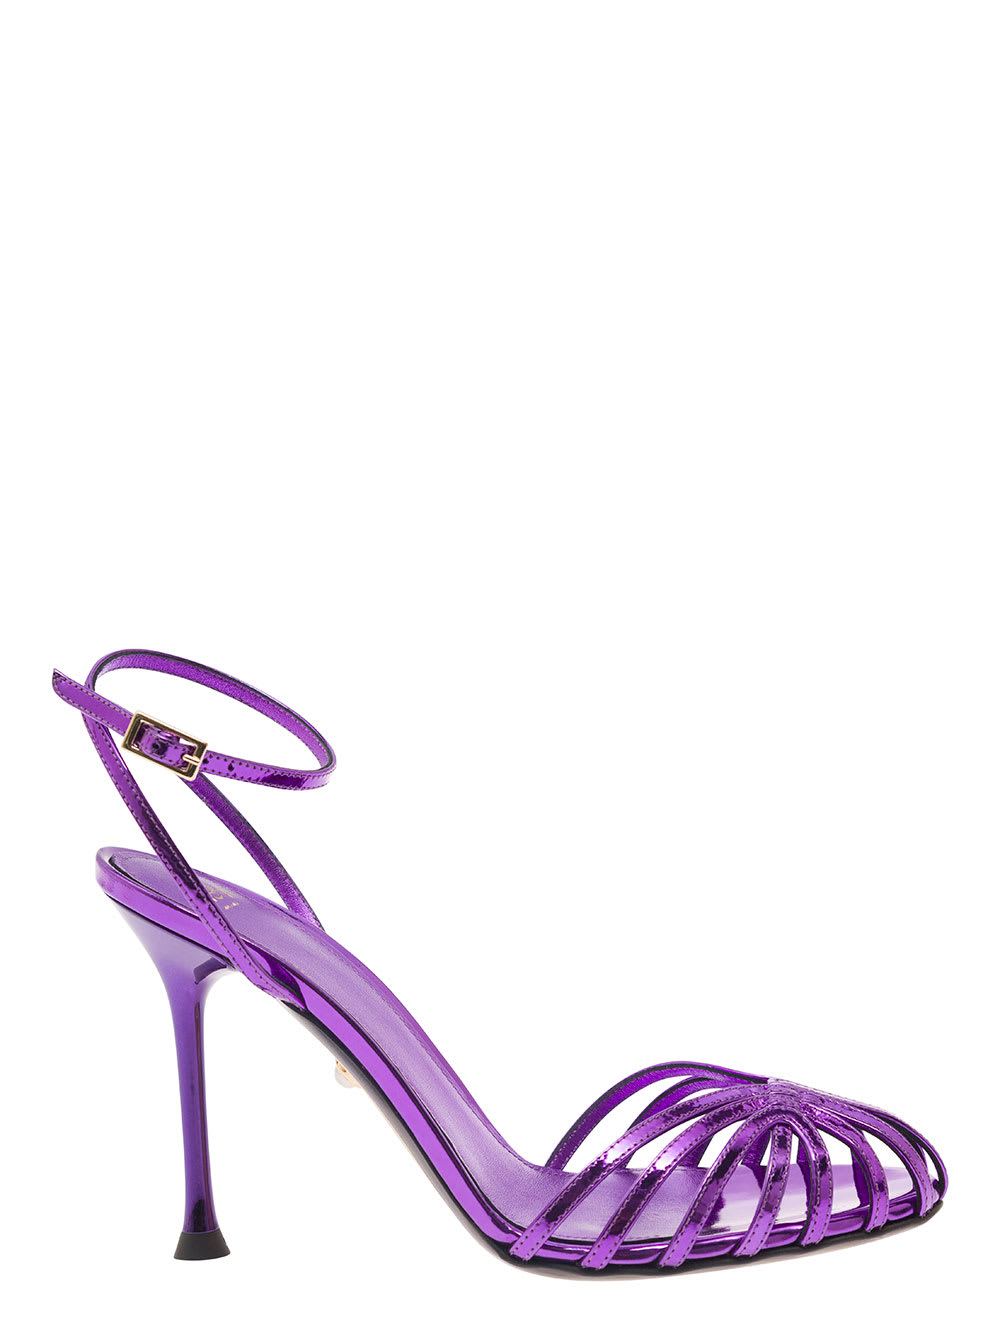 ally Purple Sandals With Stiletto Heel In Metallic Leather Woman